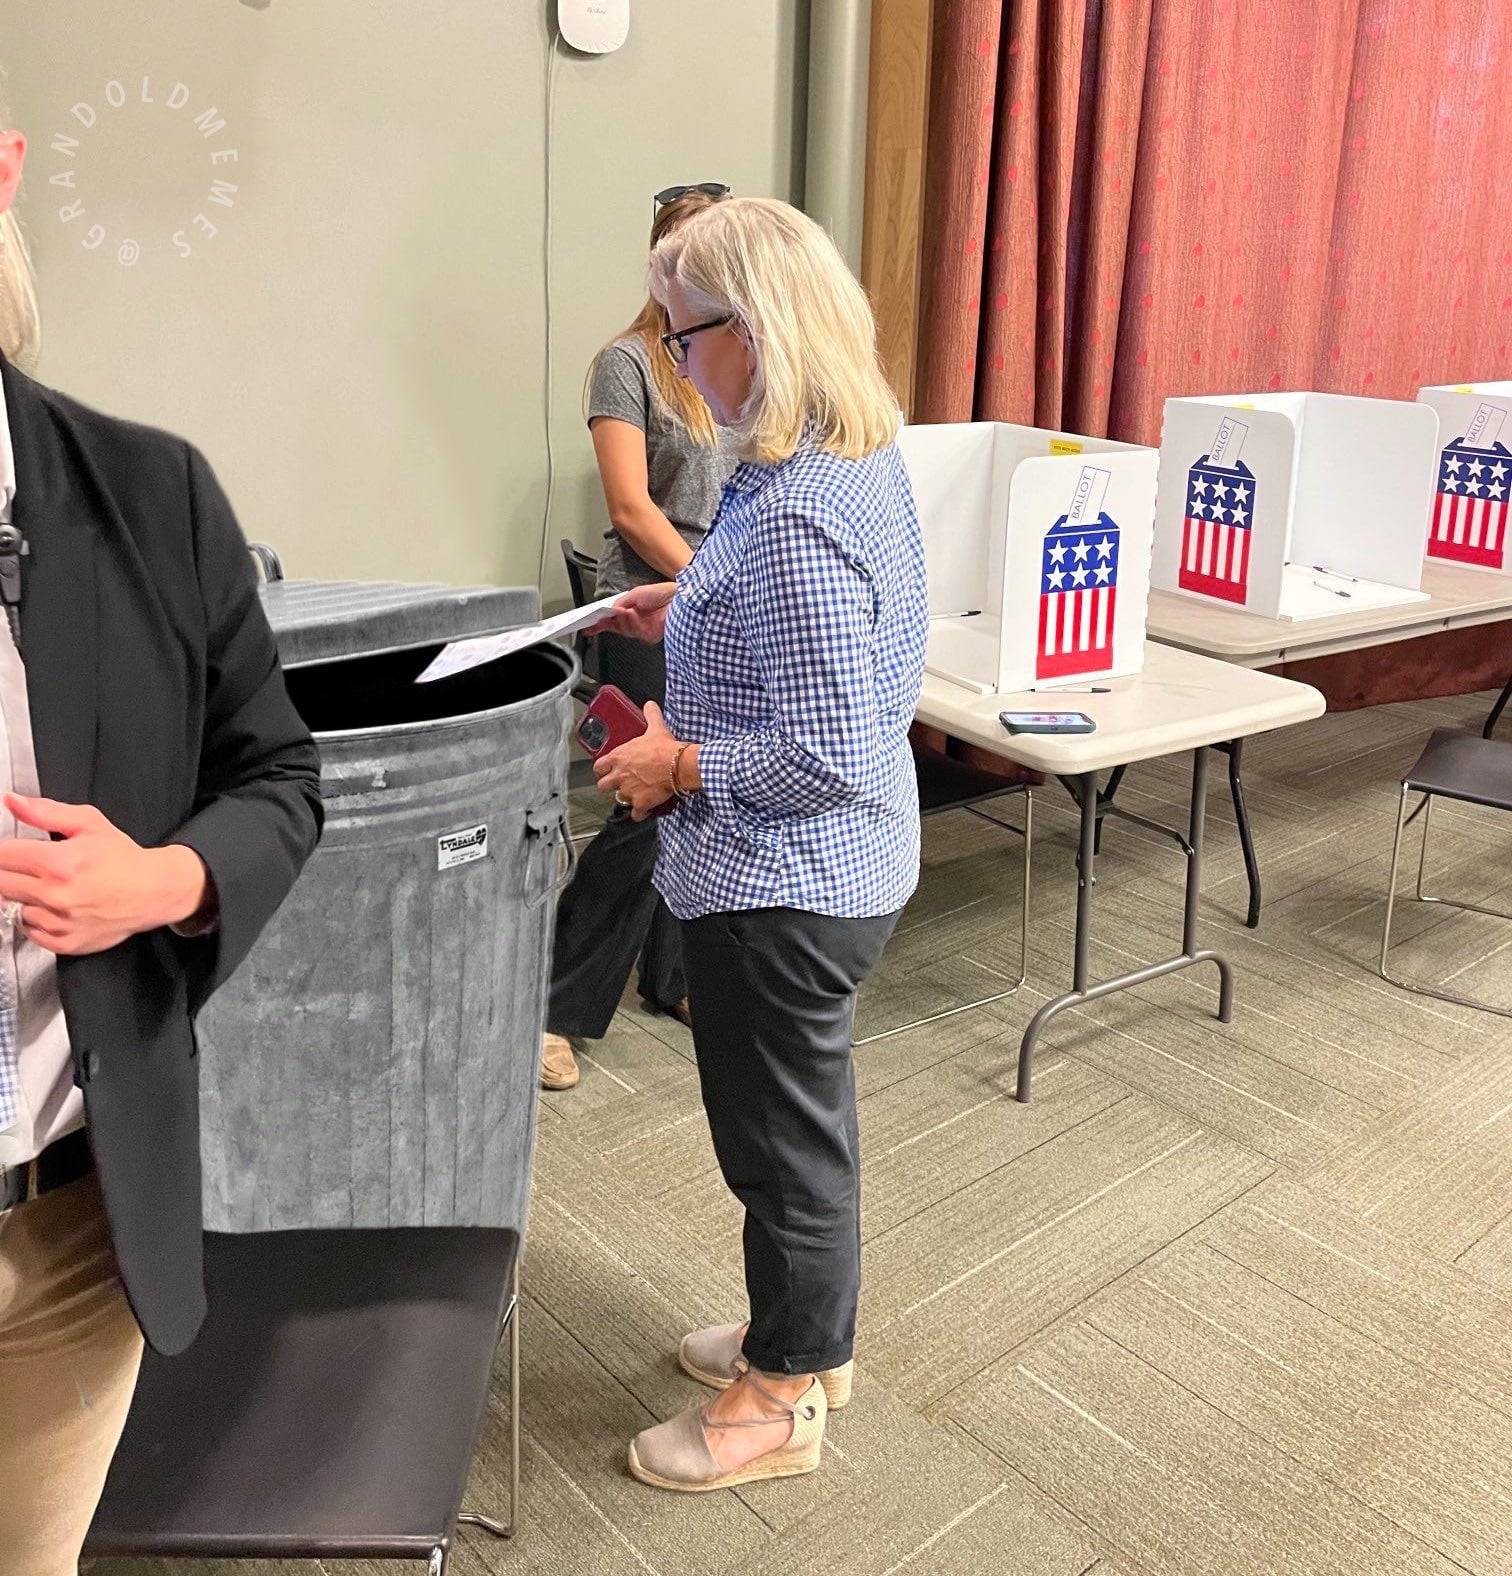 Liz Cheney voting for herself in the Wyoming primary